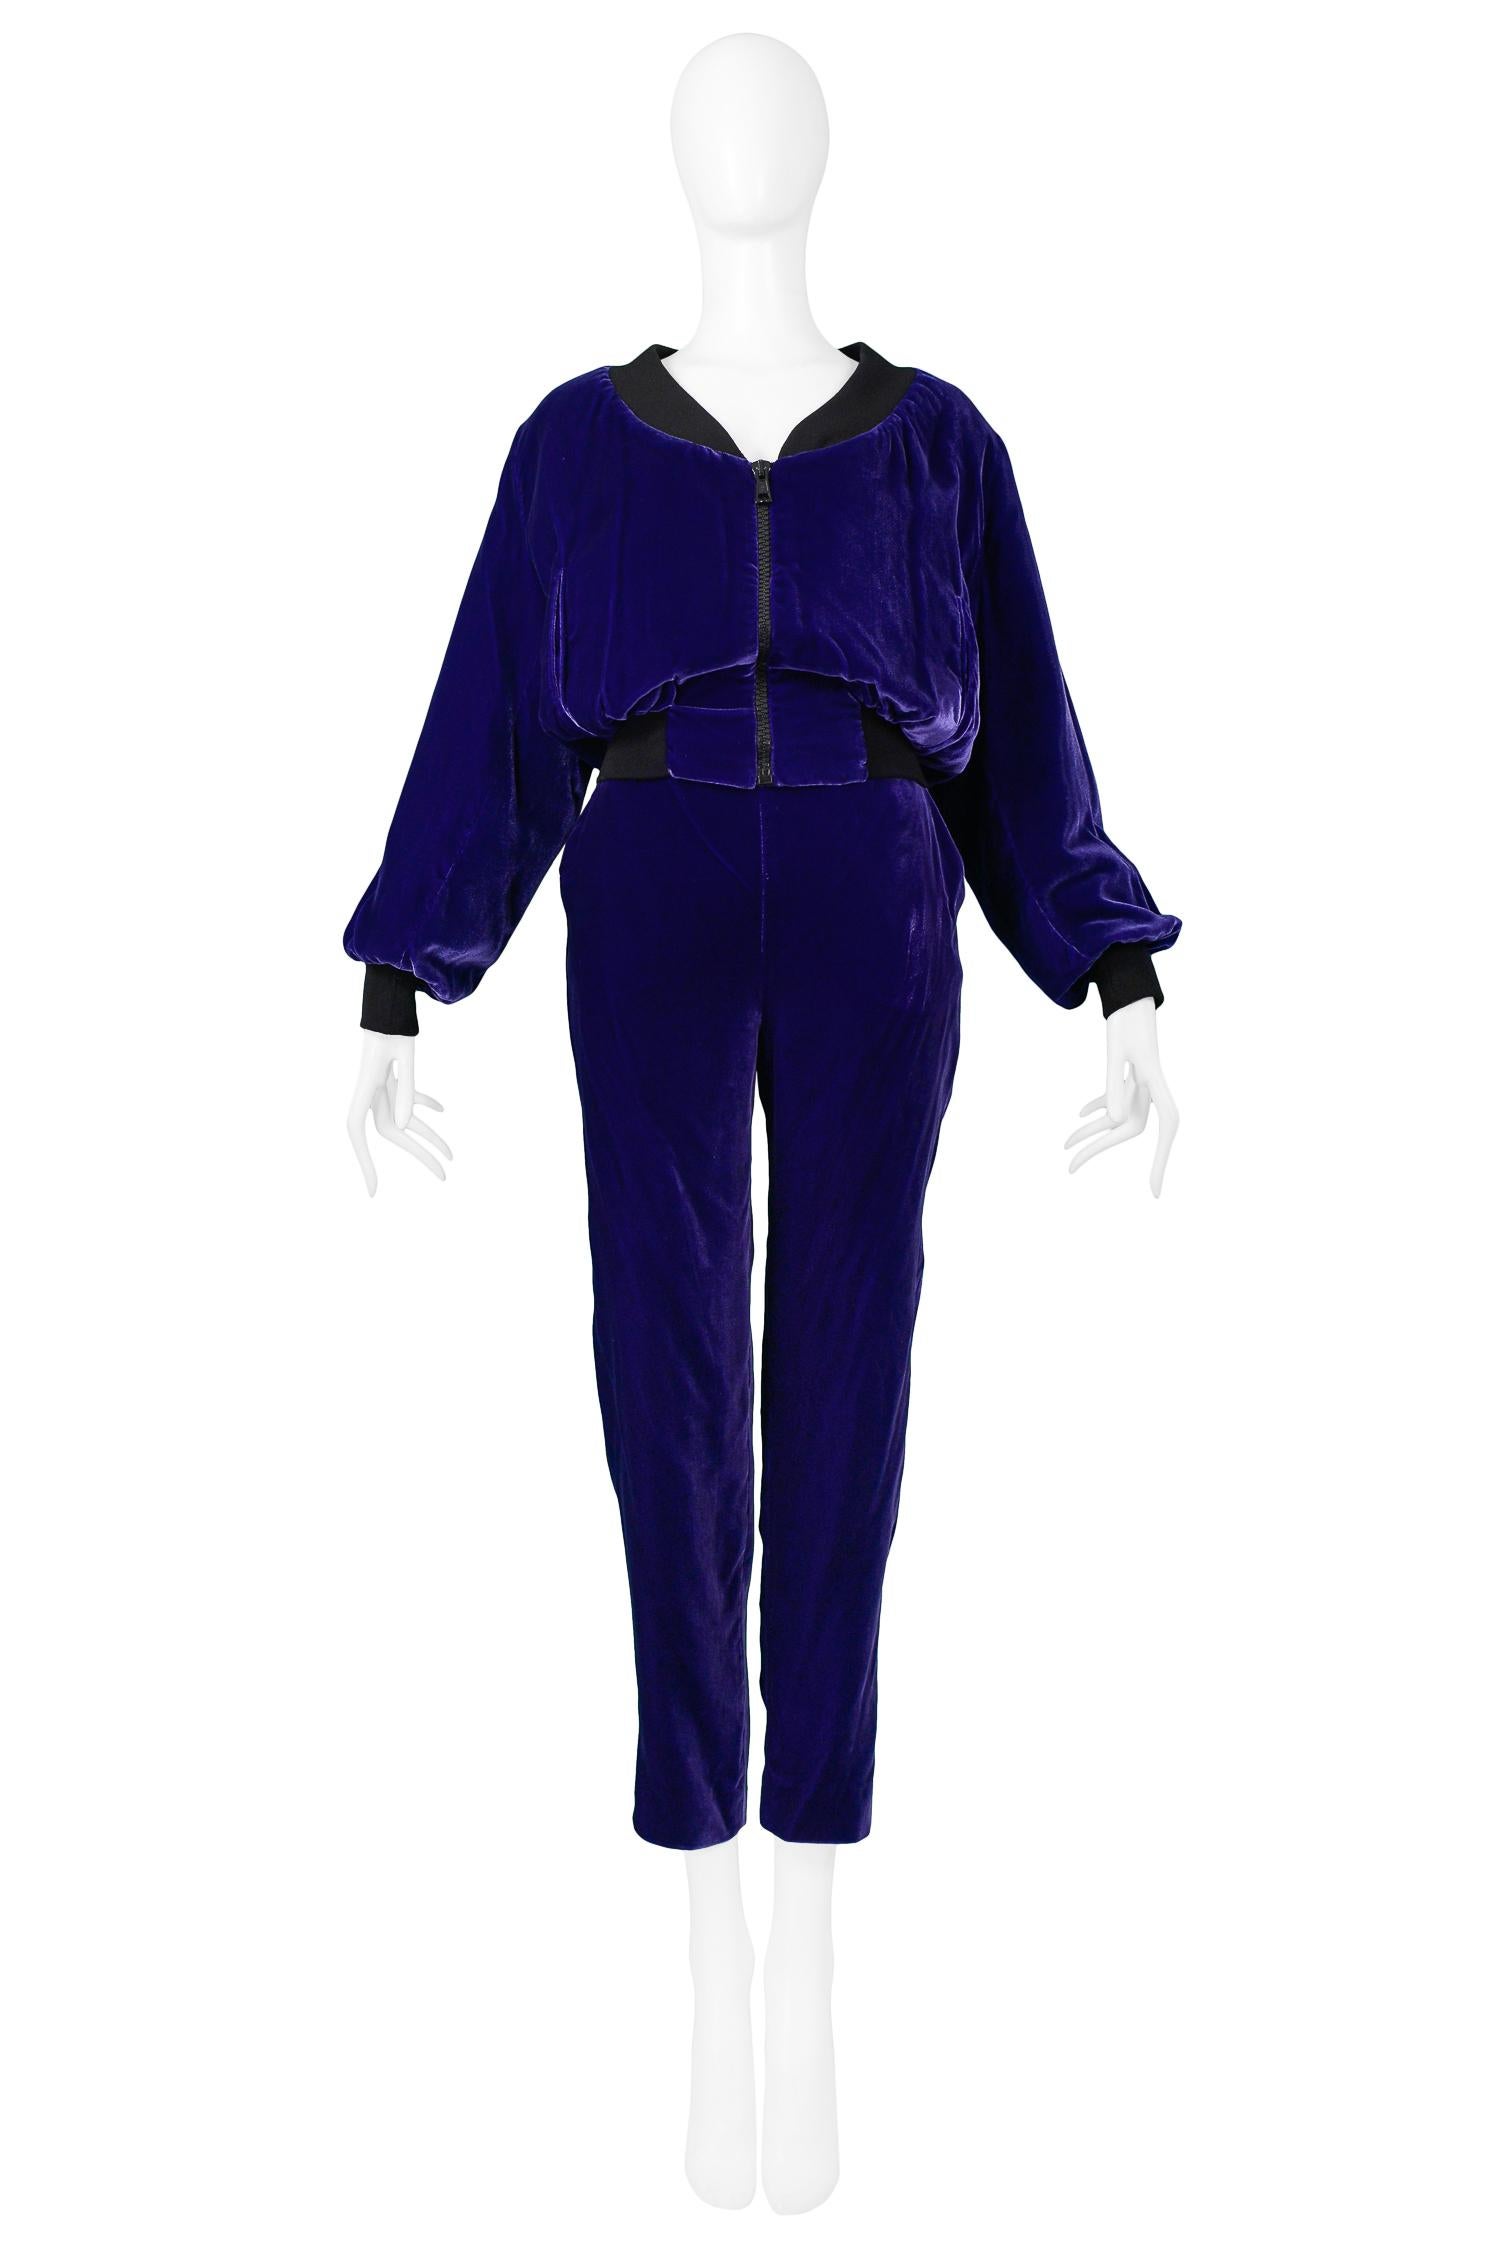 Vintage Rifat Ozbek royal purple velvet bomber jacket and pants ensemble. Bomber jacket features exposed neckline, center front zipper, contrasting black collar, waistband, and cuffs, side pockets, and metallic quilted gold lining. Pants feature